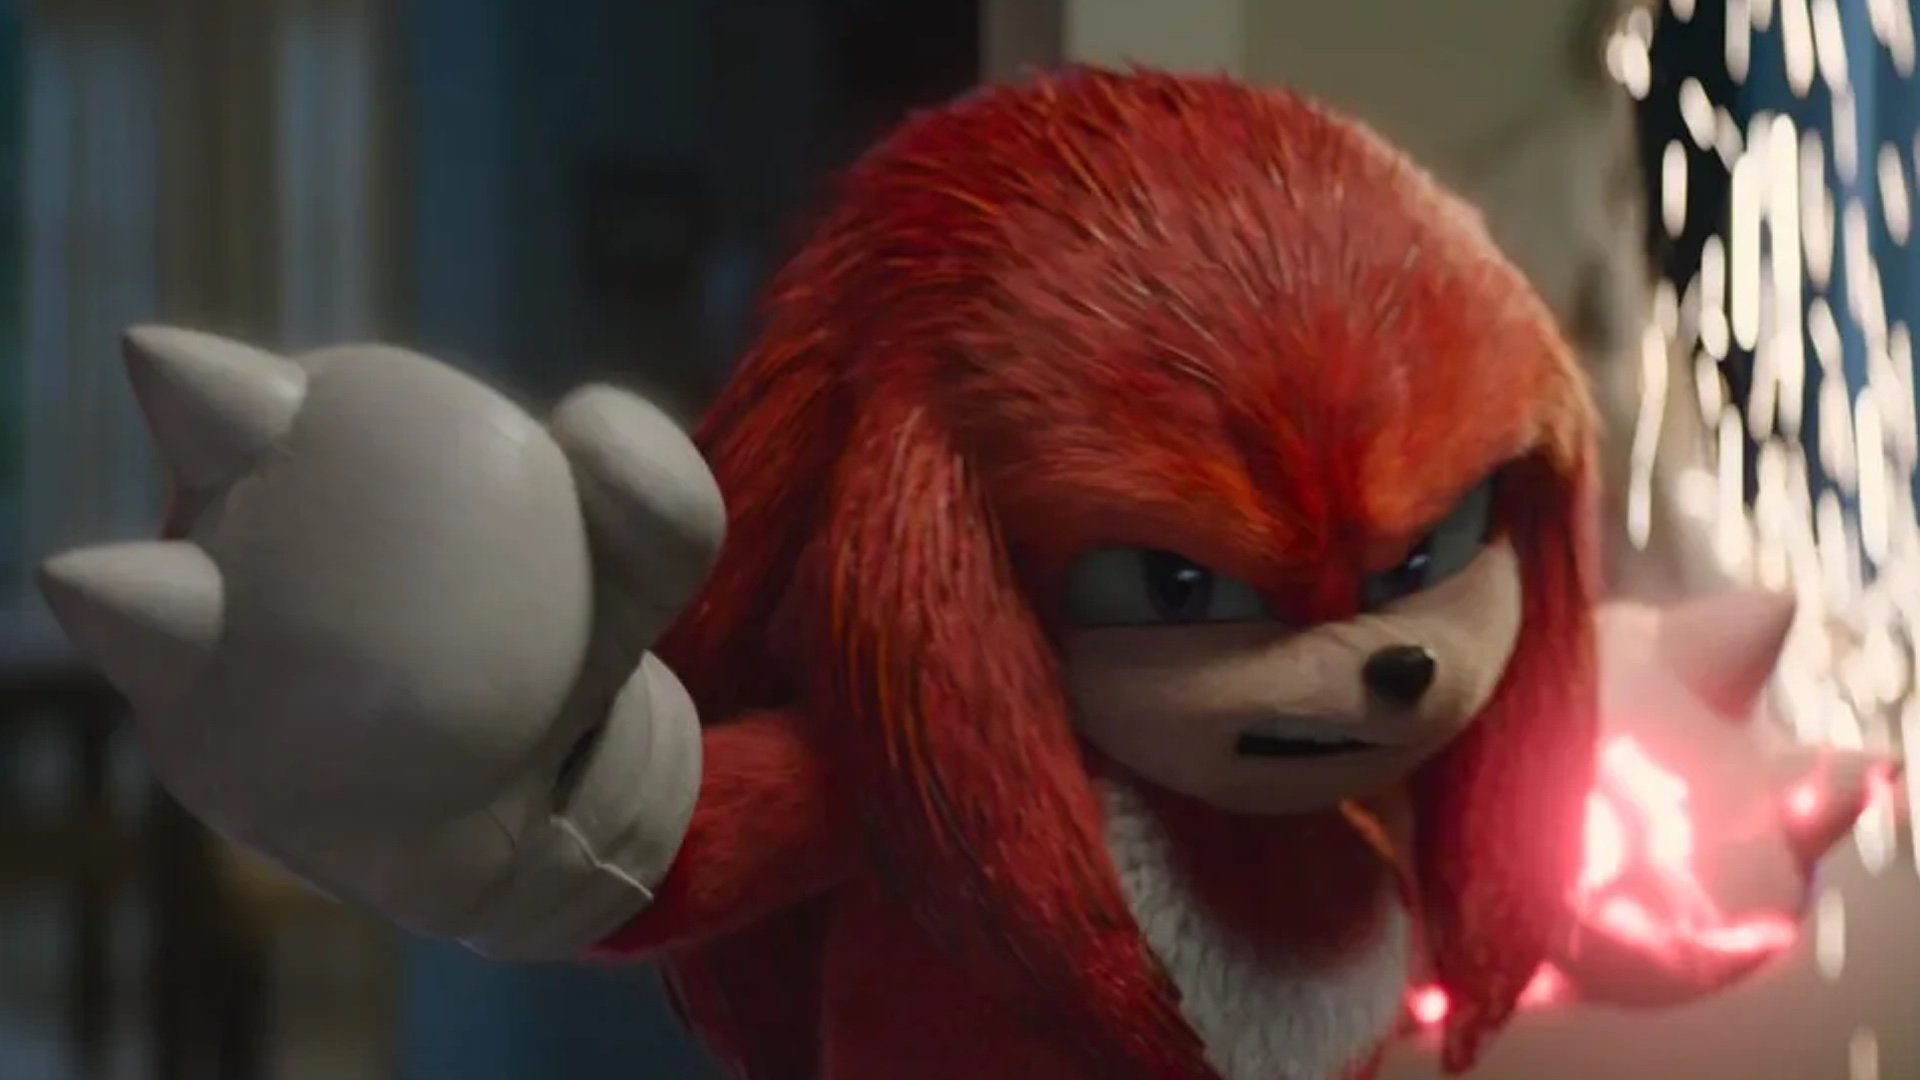 Paramount Announces SONIC THE HEDGEHOG 3 and a KNUCKLES Spinoff Series